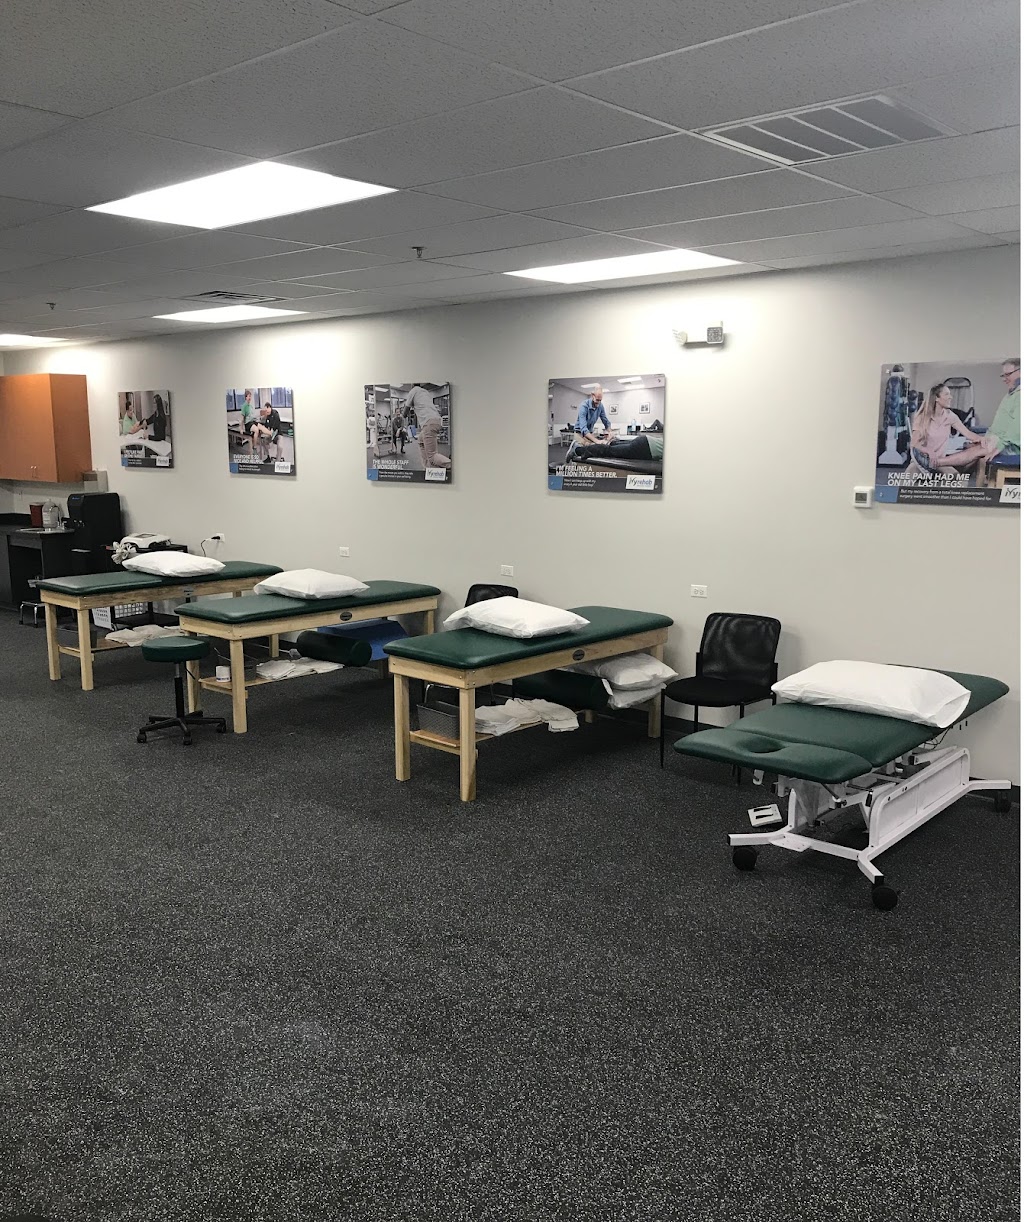 Ivy Rehab Physical Therapy | 2777 Maple Ave, Lisle, IL 60532, USA | Phone: (630) 326-8810